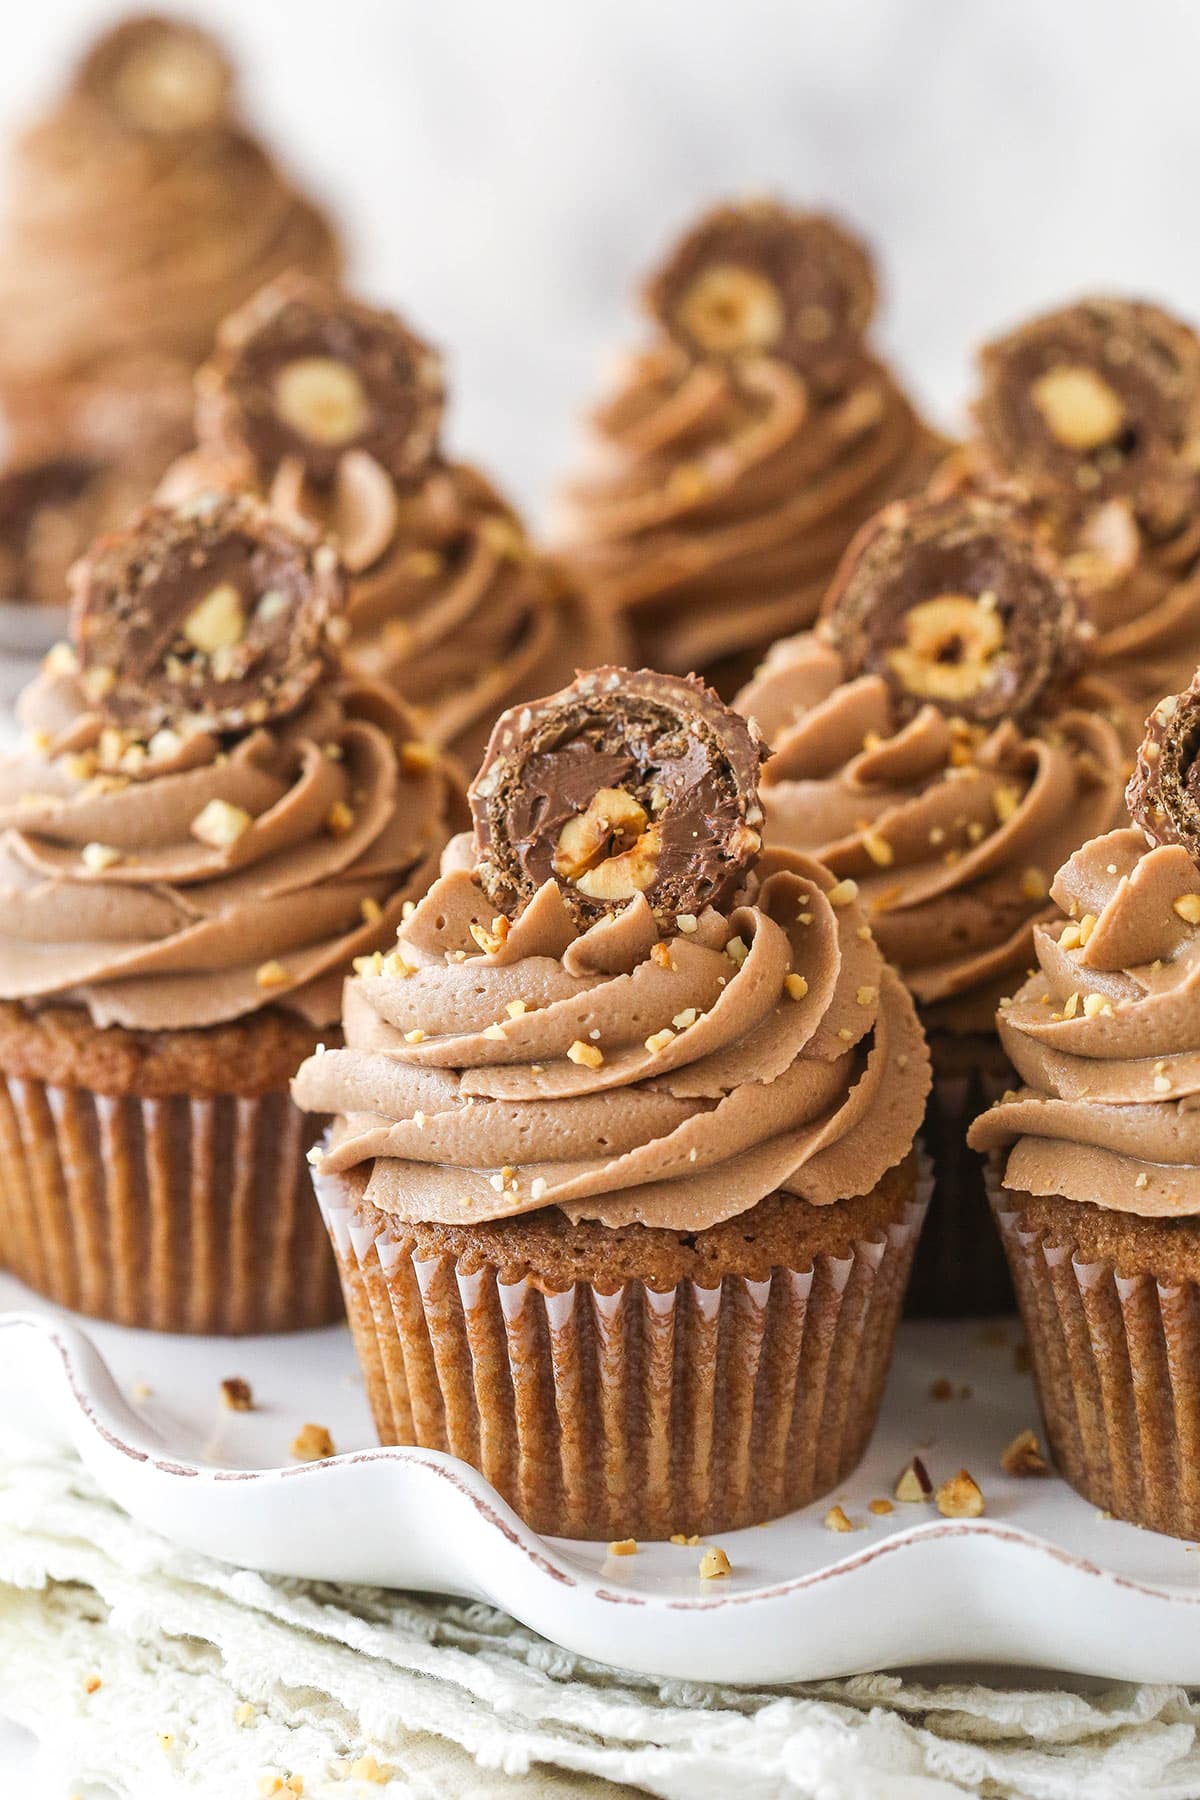 Nutella cupcakes on a serving platter garnished with chocolate hazelnut candies.